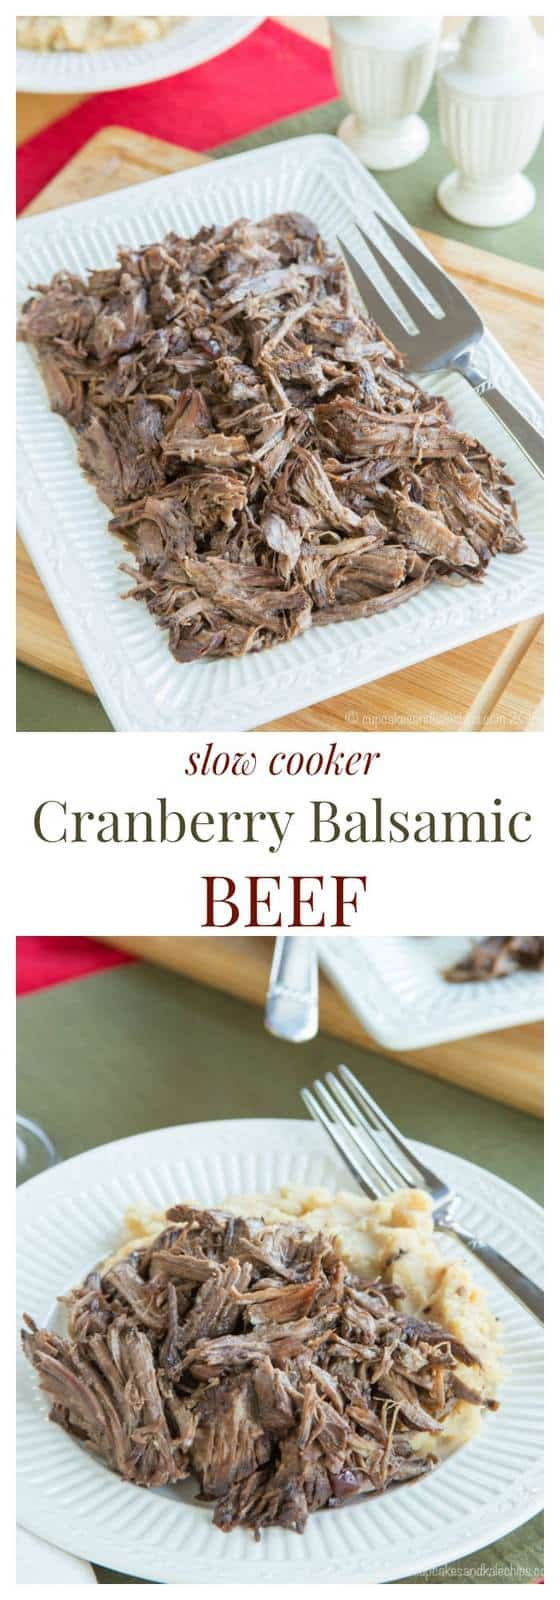 Slow Cooker Cranberry Balsamic Beef - just four ingredients in this easy slow cooker recipe for a tender, fall apart beef roast. #SundaySupper with #GalloFamily #ad | cupcakesandkalechips.com | gluten free